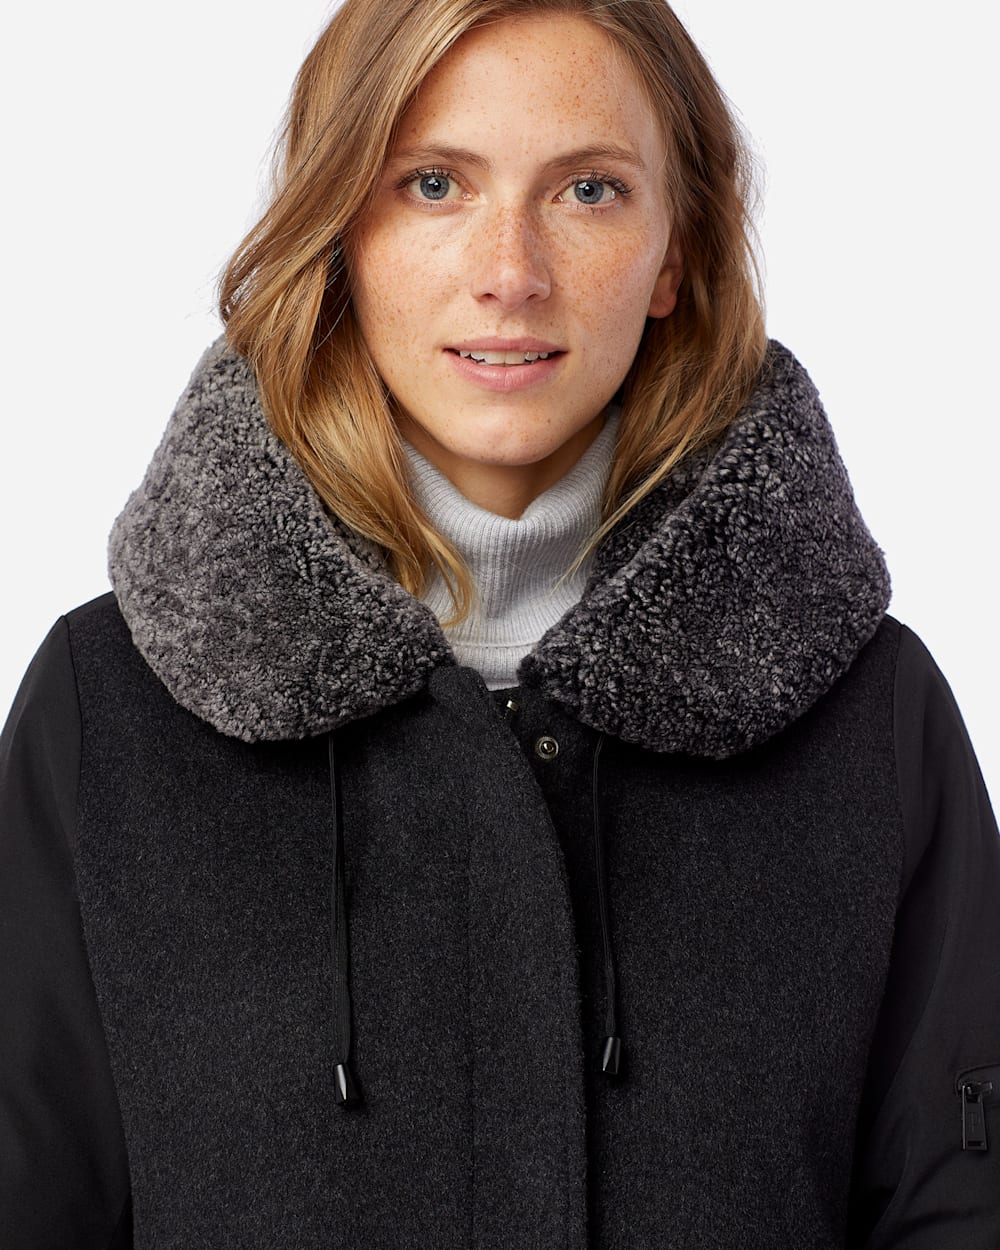 ALTERNATE VIEW OF WOMEN'S ALBANY SHEARLING-HOODED COAT IN CHARCOAL/BLACK image number 4